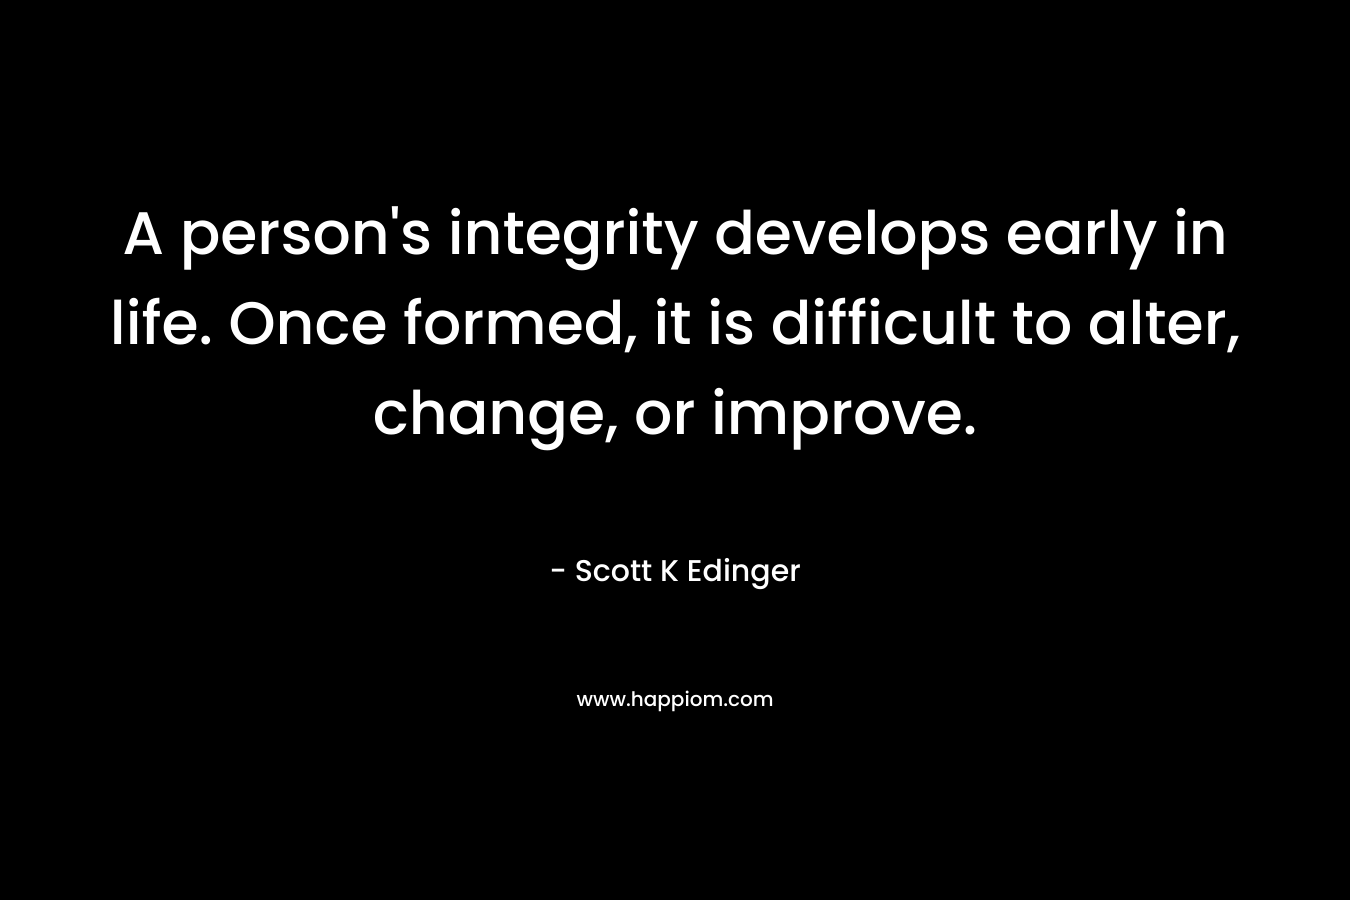 A person’s integrity develops early in life. Once formed, it is difficult to alter, change, or improve. – Scott K Edinger